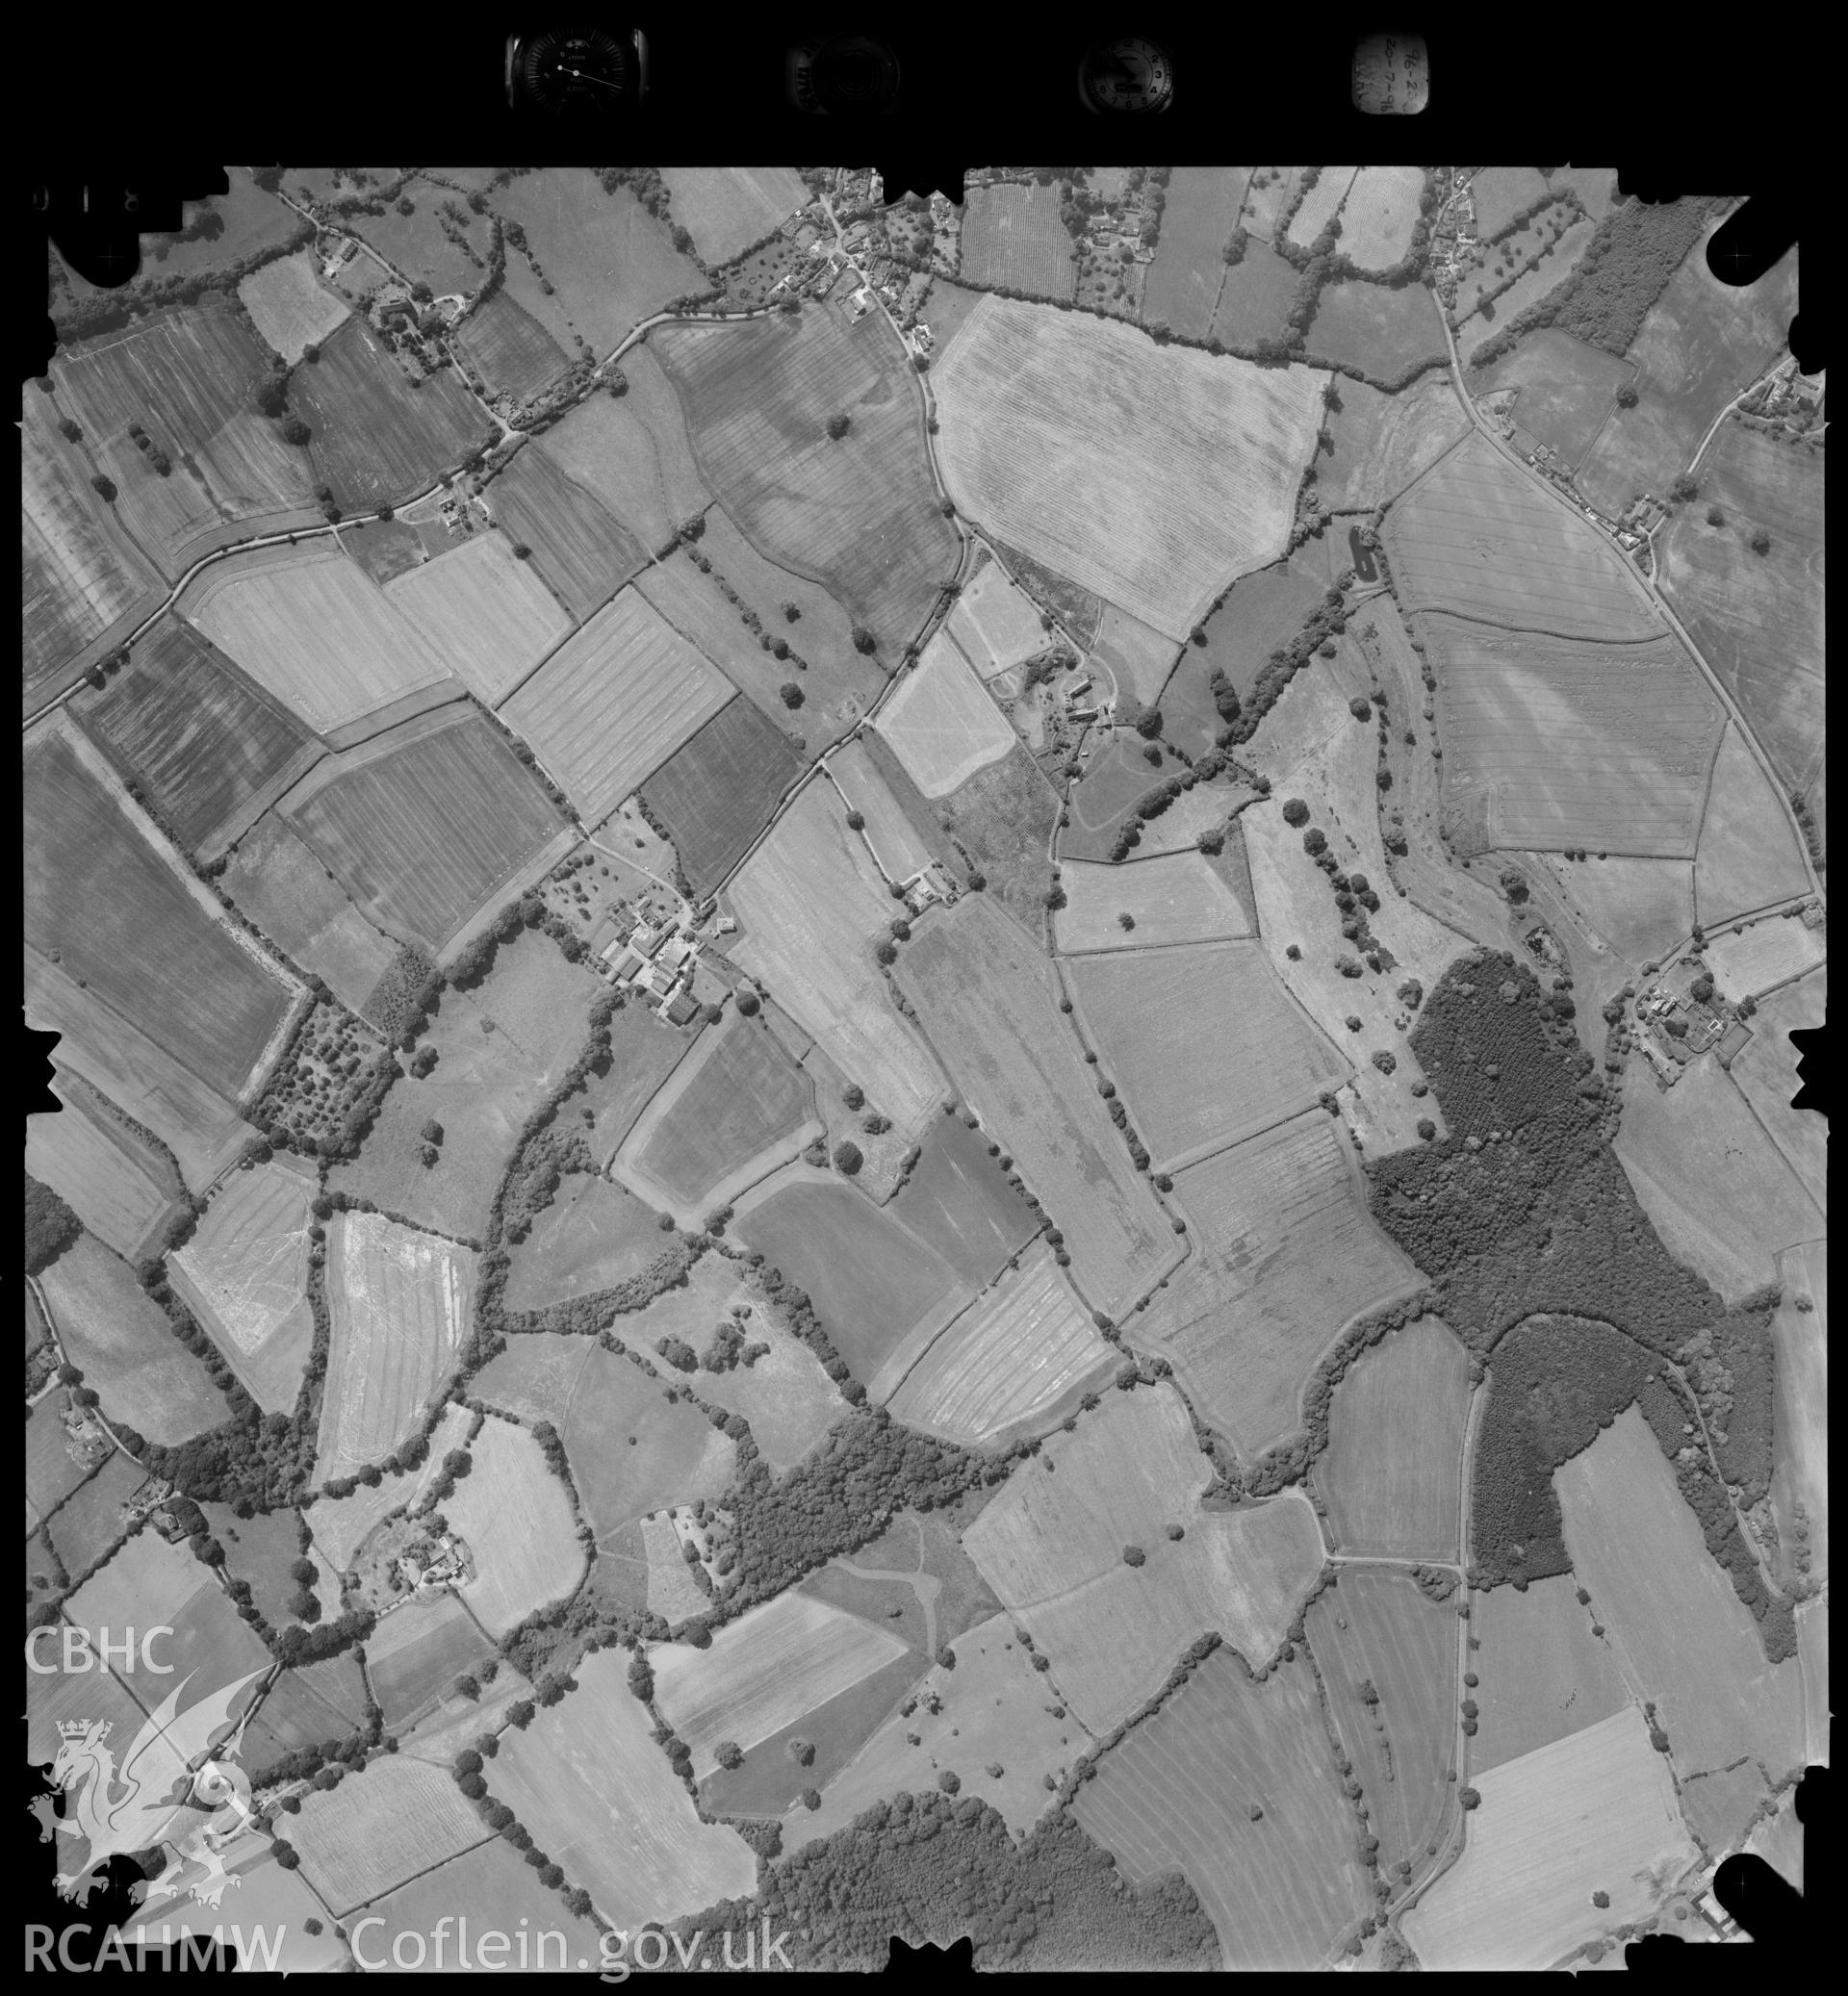 Digitized copy of an aerial photograph showing the Blaenwinllan area, taken by Ordnance Survey, 1996.